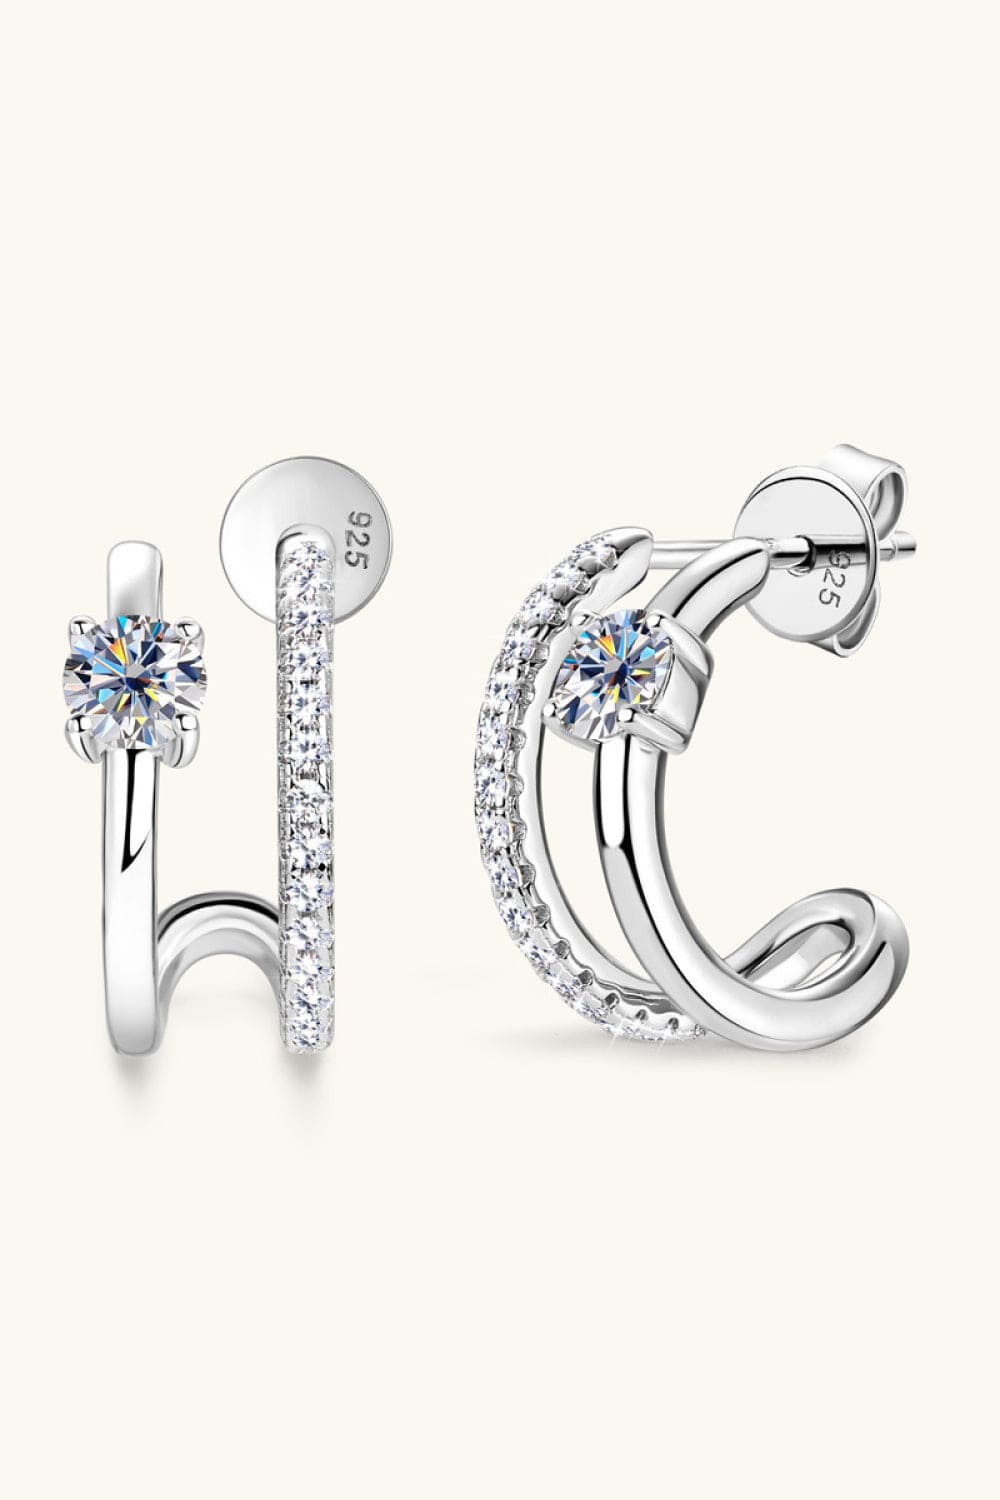 "Close-up image of Moissanite 925 Sterling Silver C-Hoop Earrings. These elegant earrings feature C-shaped hoops made from high-quality 925 sterling silver, adorned with sparkling Moissanite gemstones, creating a sophisticated and timeless jewelry piece."